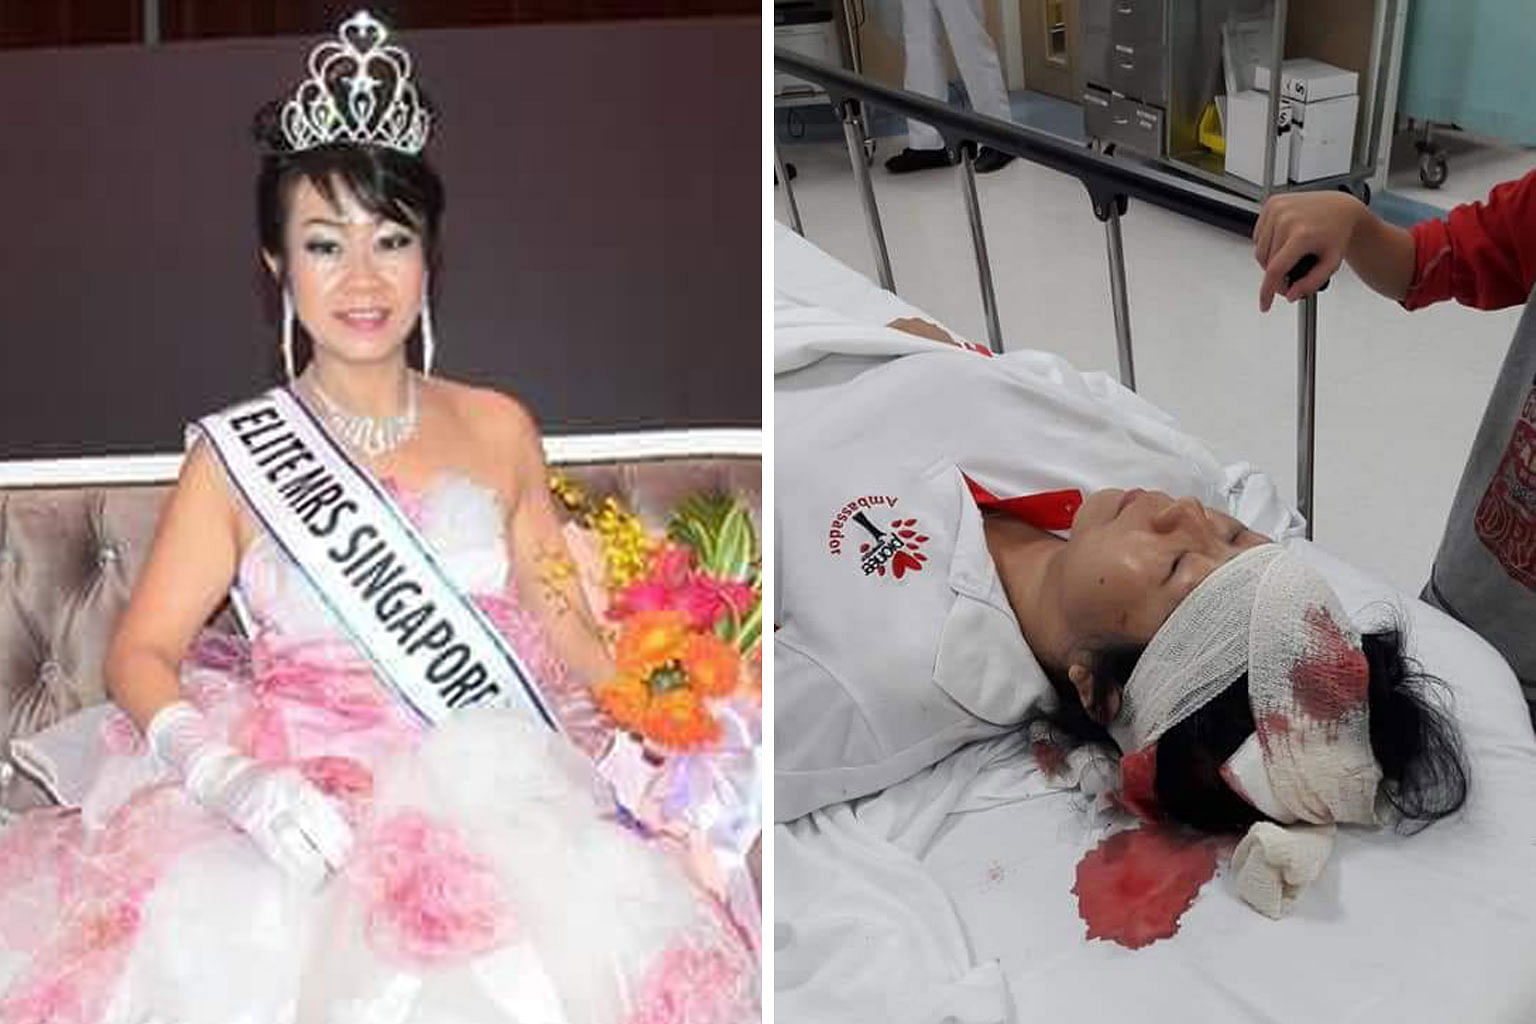 Madam Cassandra Ho, who was crowned Elite Mrs Singapore Asean in 2016 (far left), was taken to Tan Tock Seng Hospital after she was hit by an e-scooter. She hurt her head and face (left) in the accident.